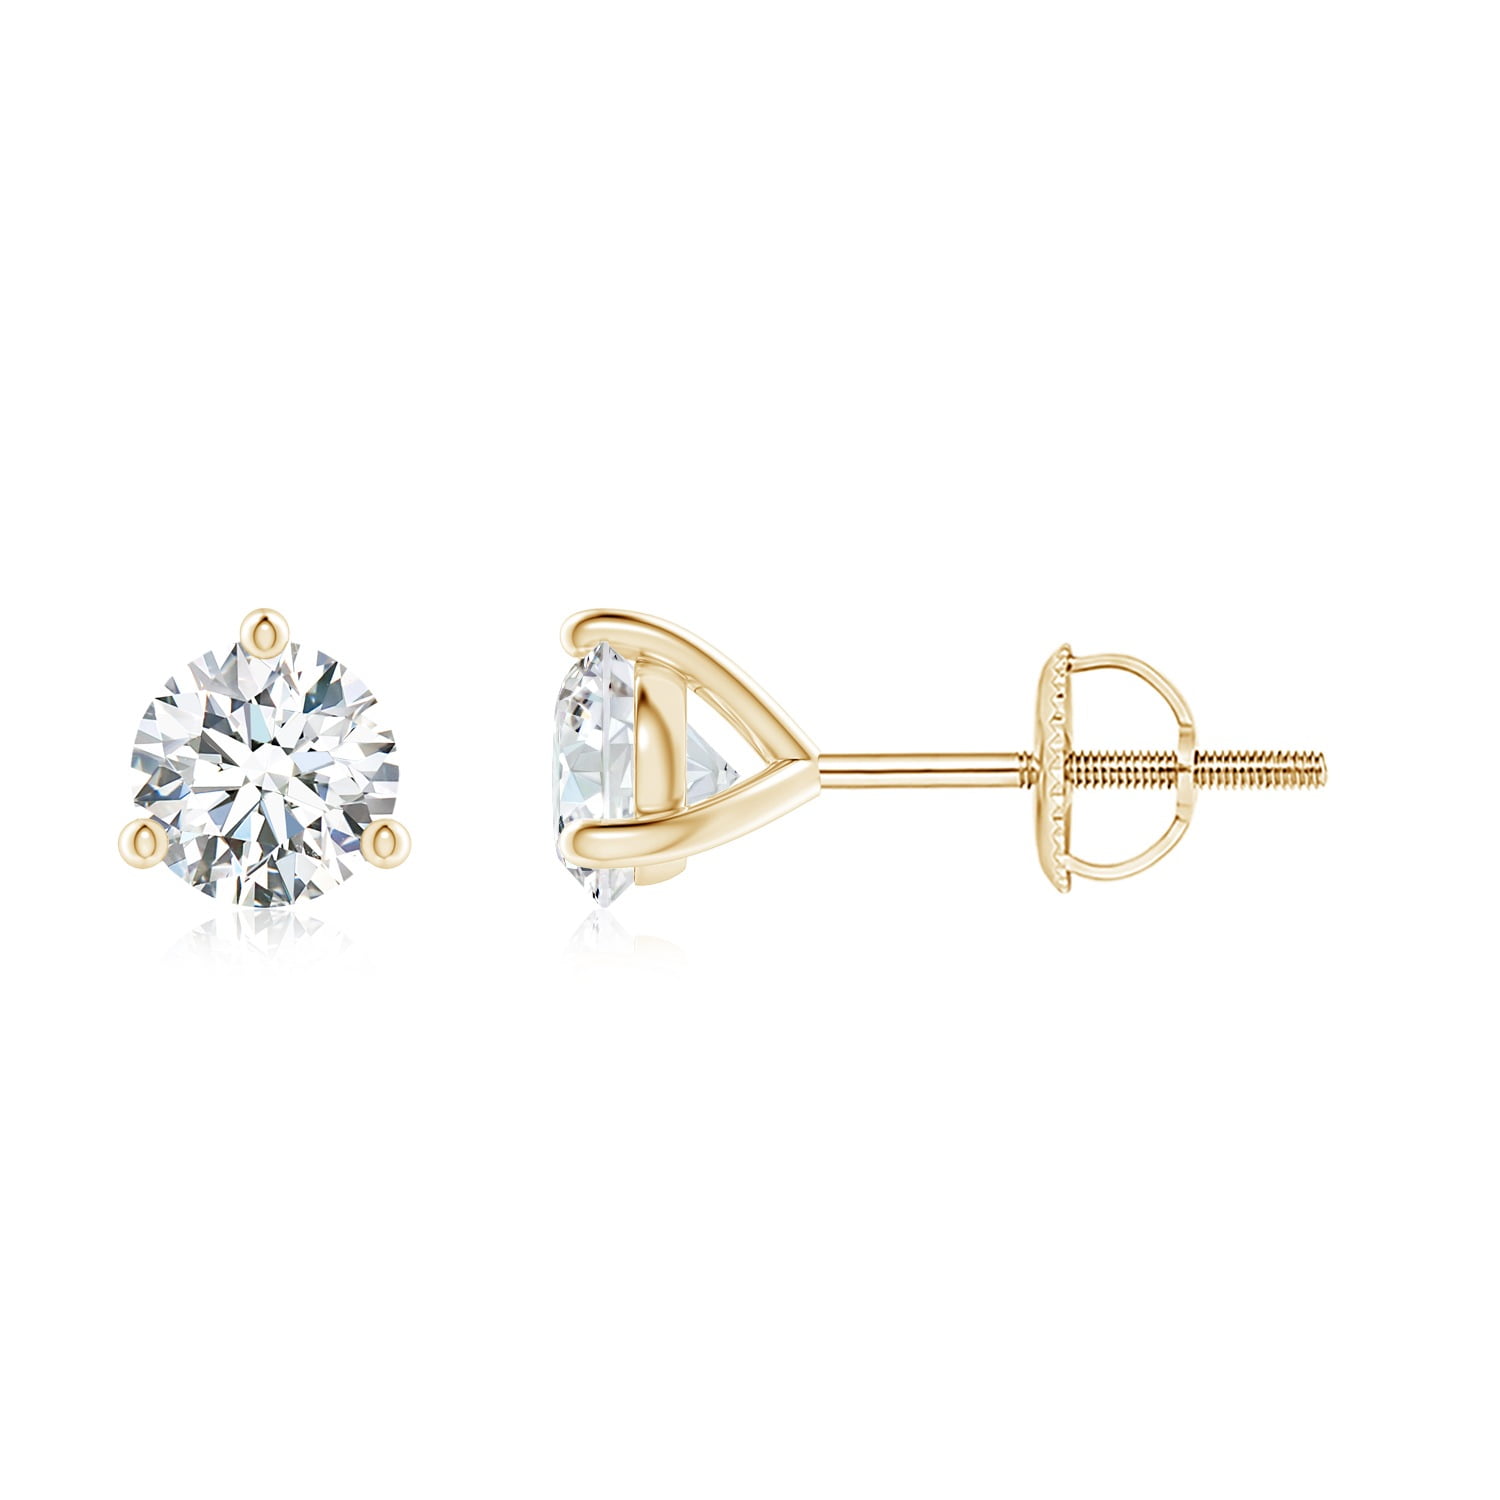 Details about   1.5 mm Round Diamond Stud Screw Back Earrings in 10k Y Gold 